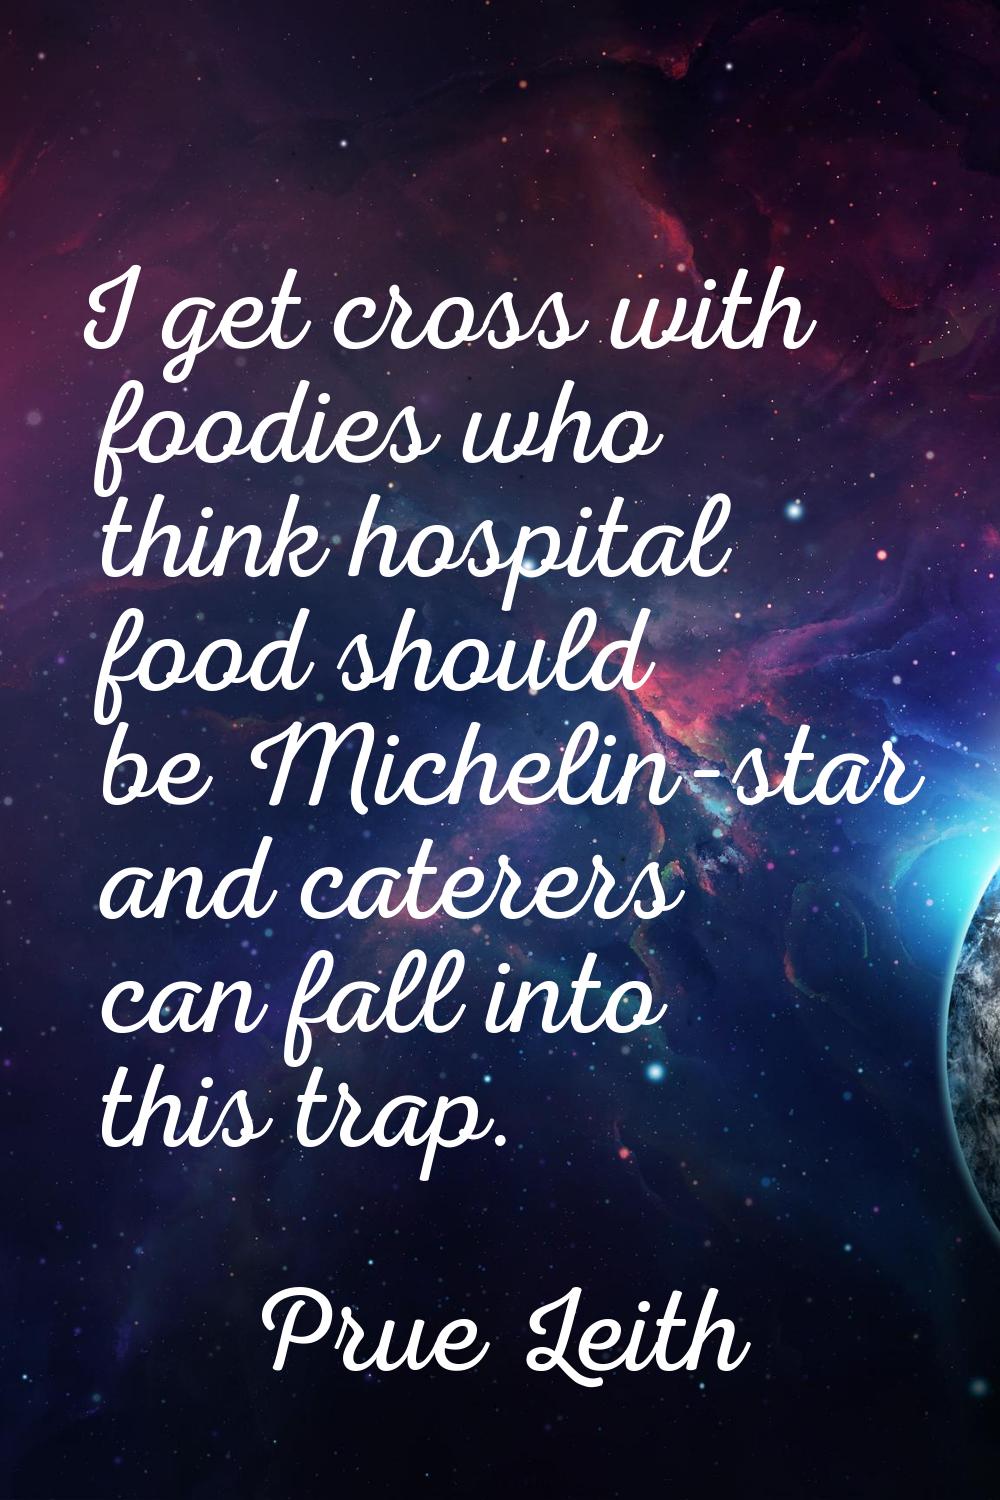 I get cross with foodies who think hospital food should be Michelin-star and caterers can fall into